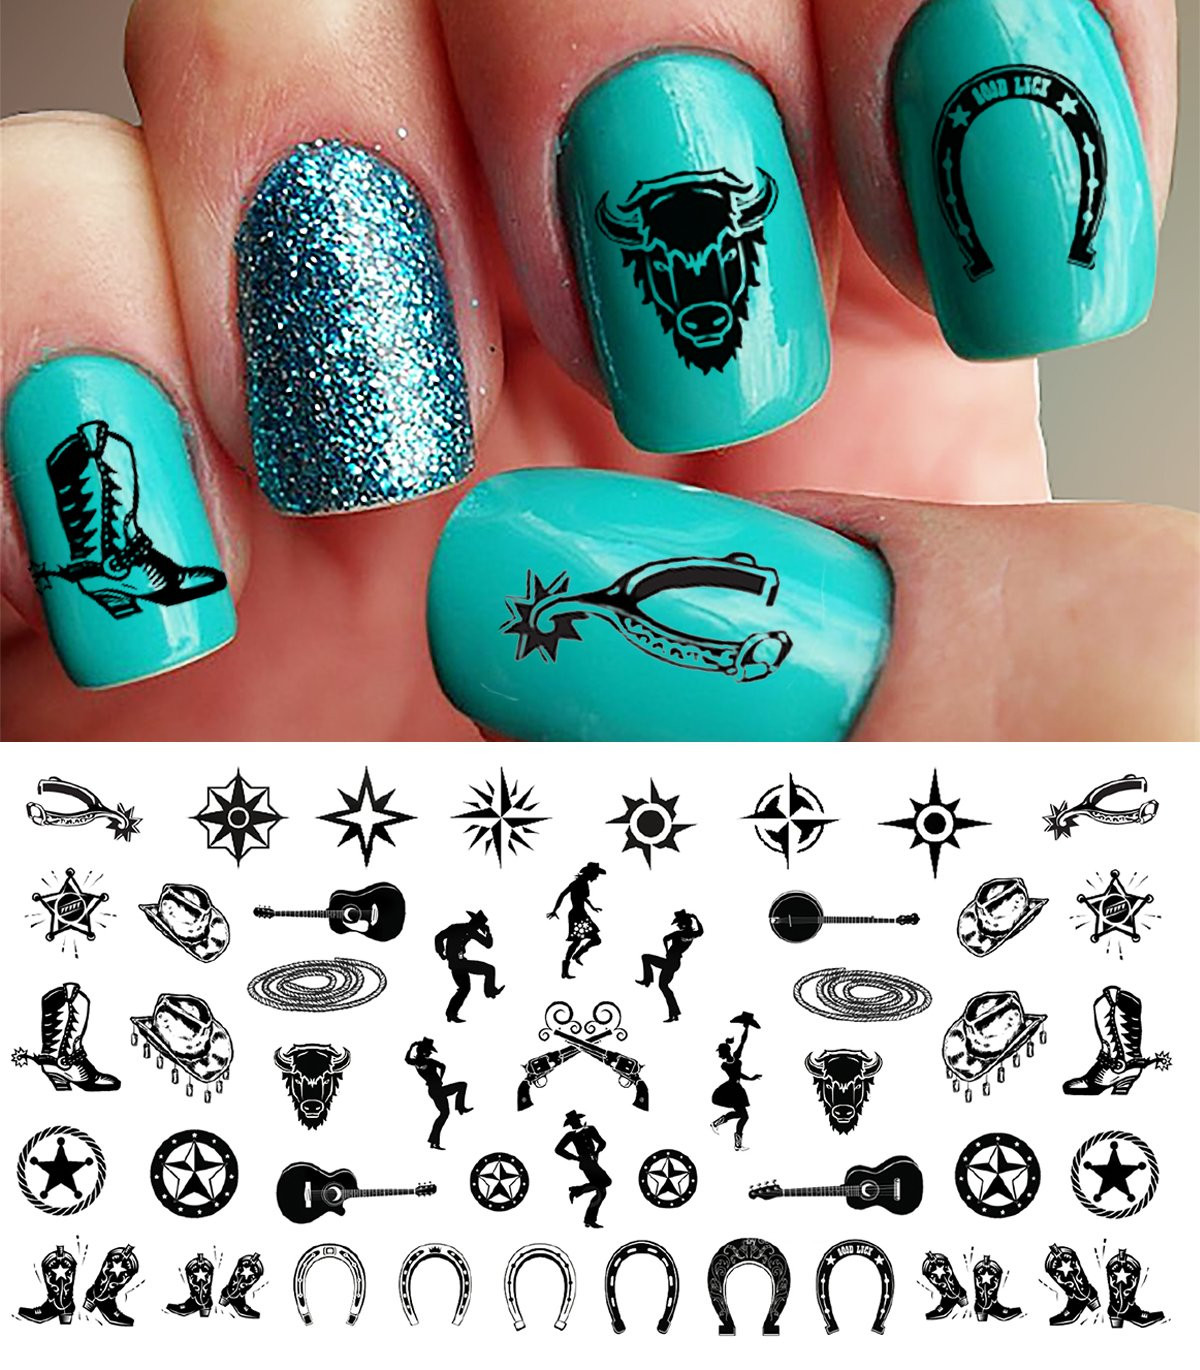 Country Nail Designs
 Amazon 40 Horse Nail Art Decals Beauty